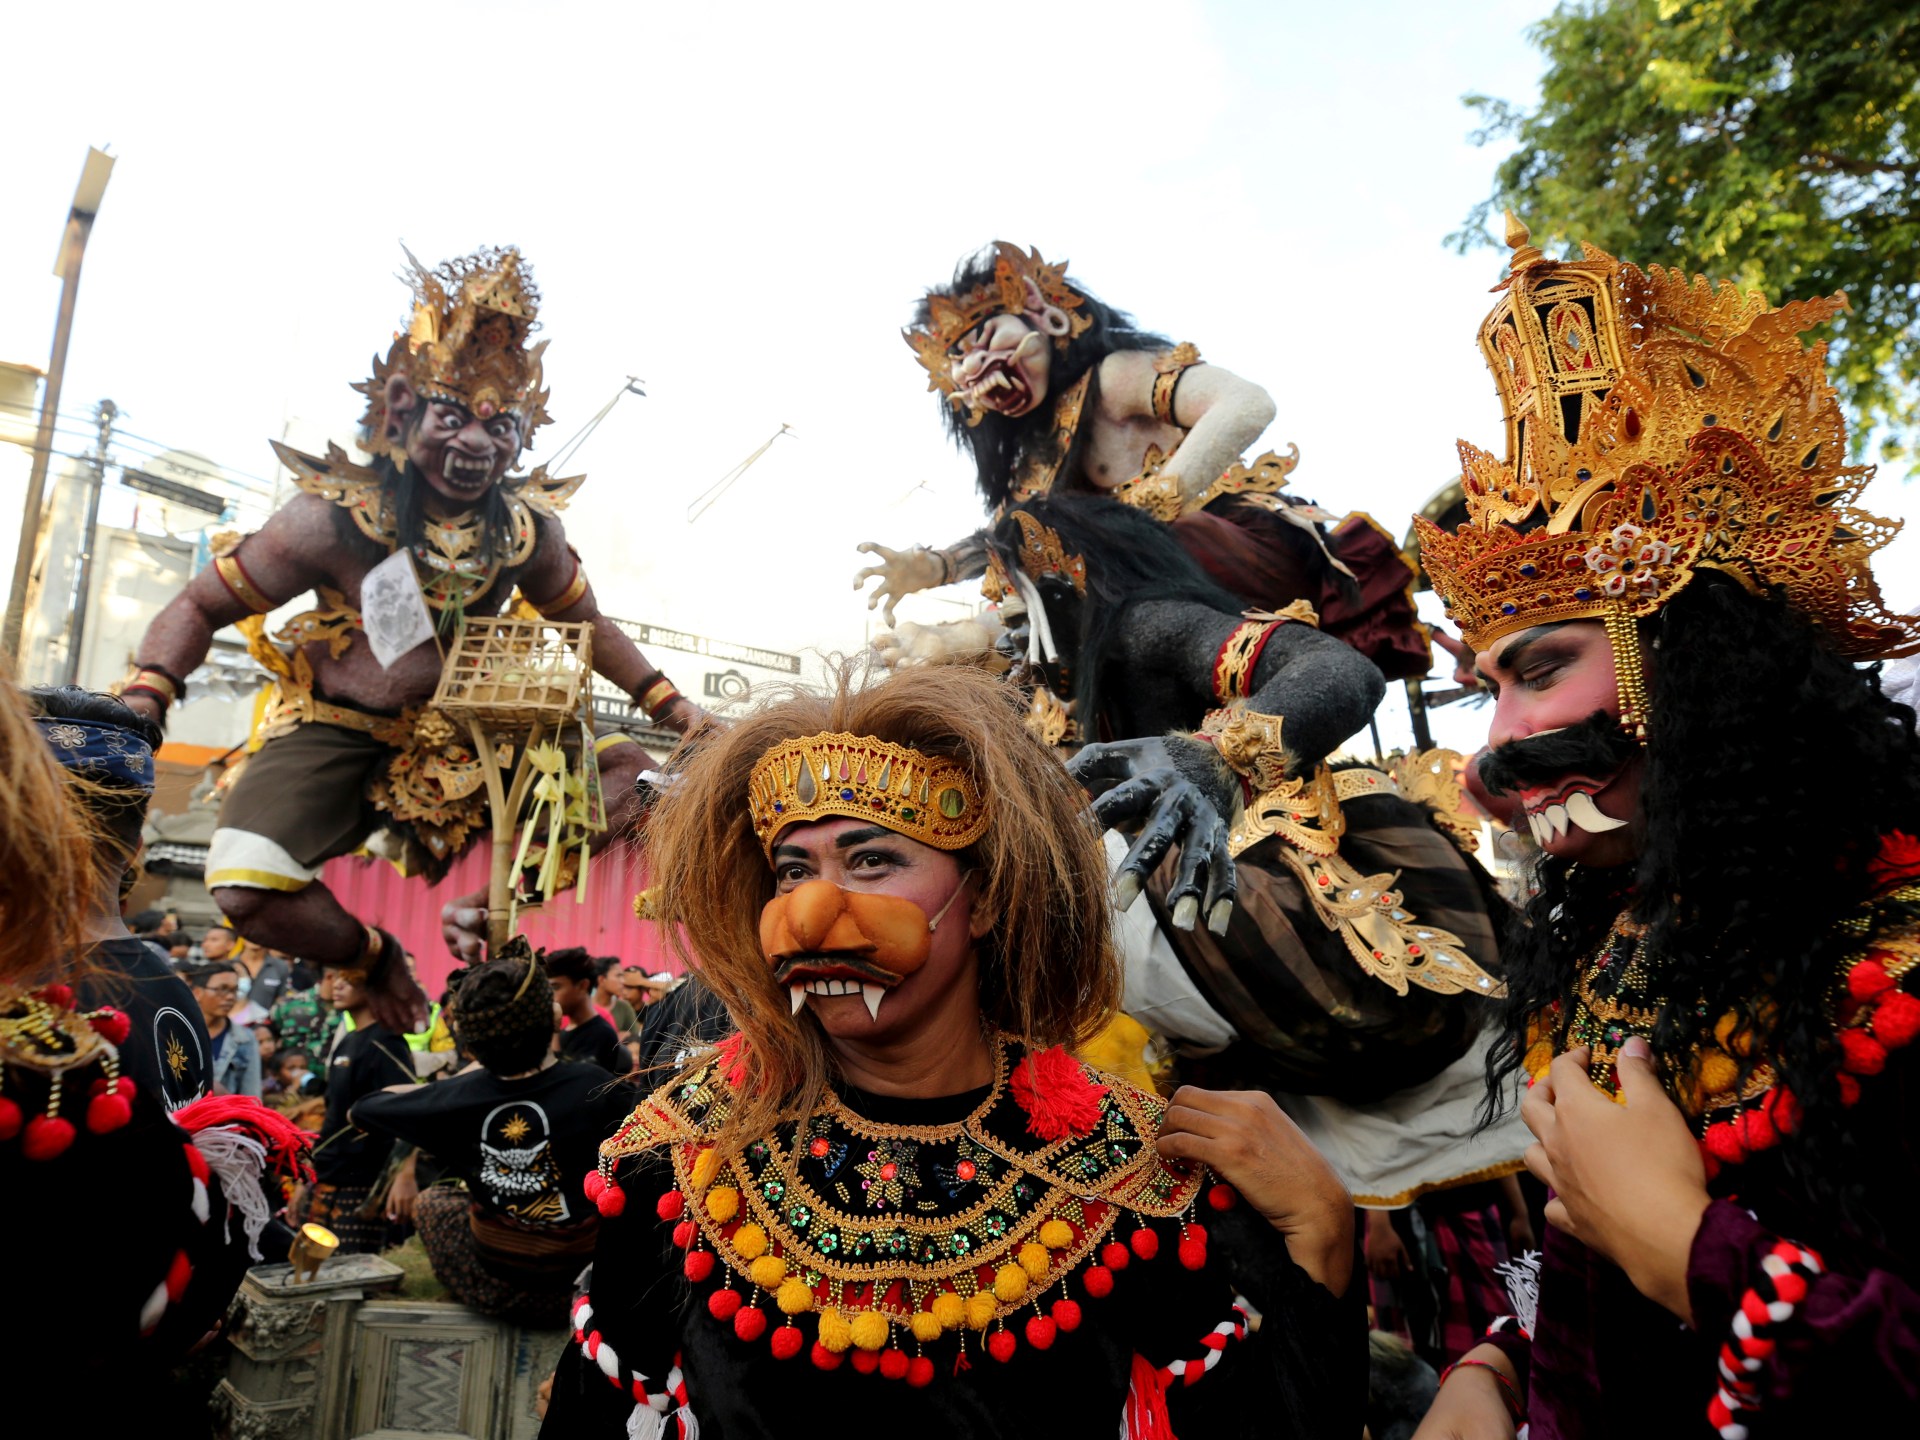 Old ways survive in Bali despite mass tourism, but for how long? | Arts and Culture News